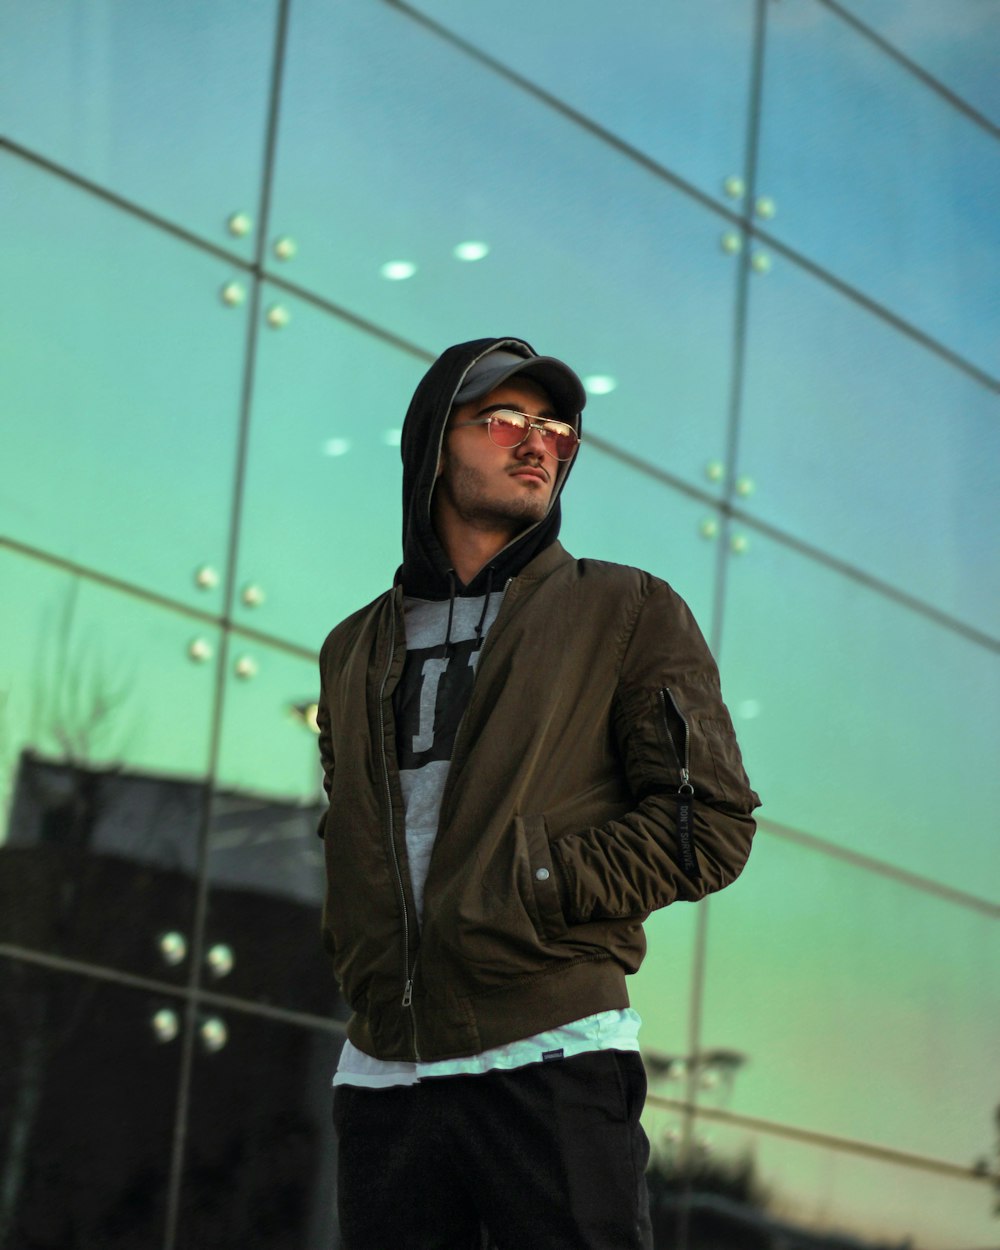 man wearing gray zip-up jacket and sunglasses standing while glancing his left side near glass walled building